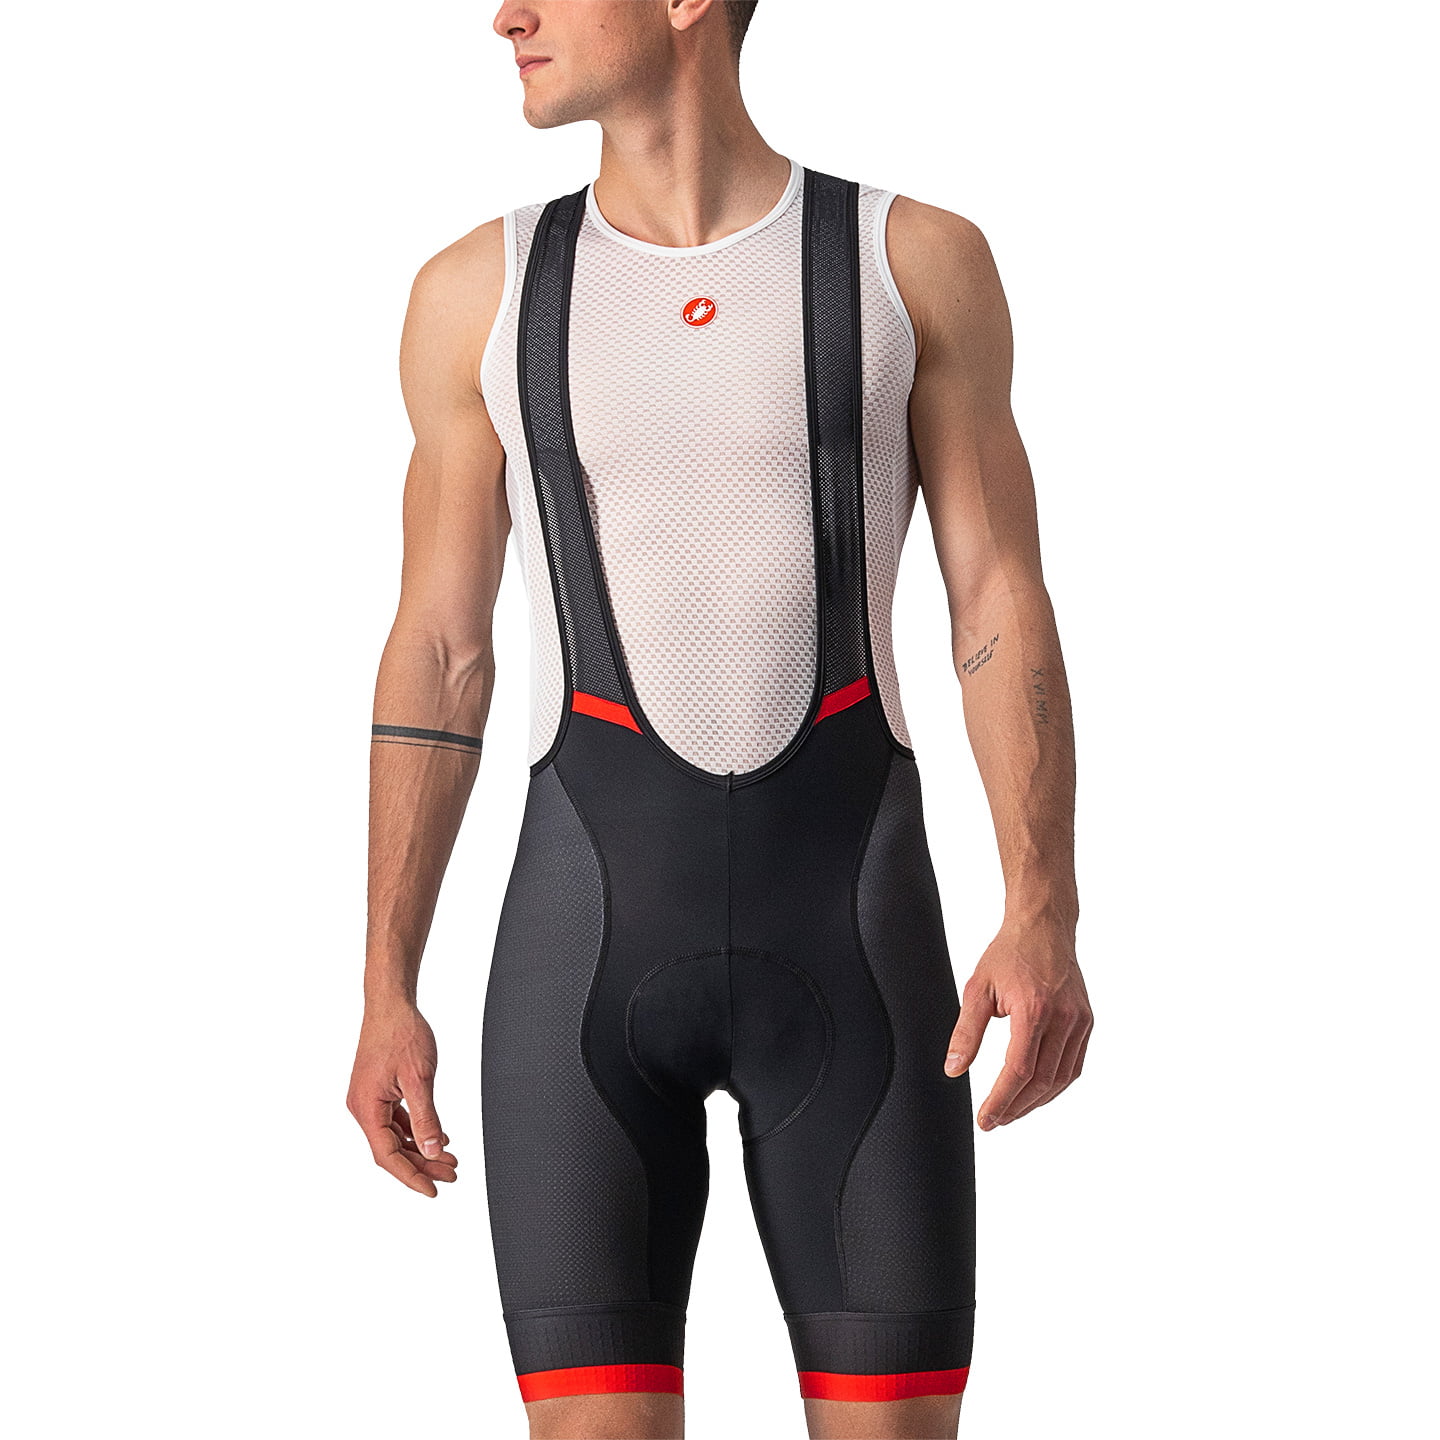 Competizione Kit Bib Shorts Bib Shorts, for men, size S, Cycle trousers, Cycle clothing